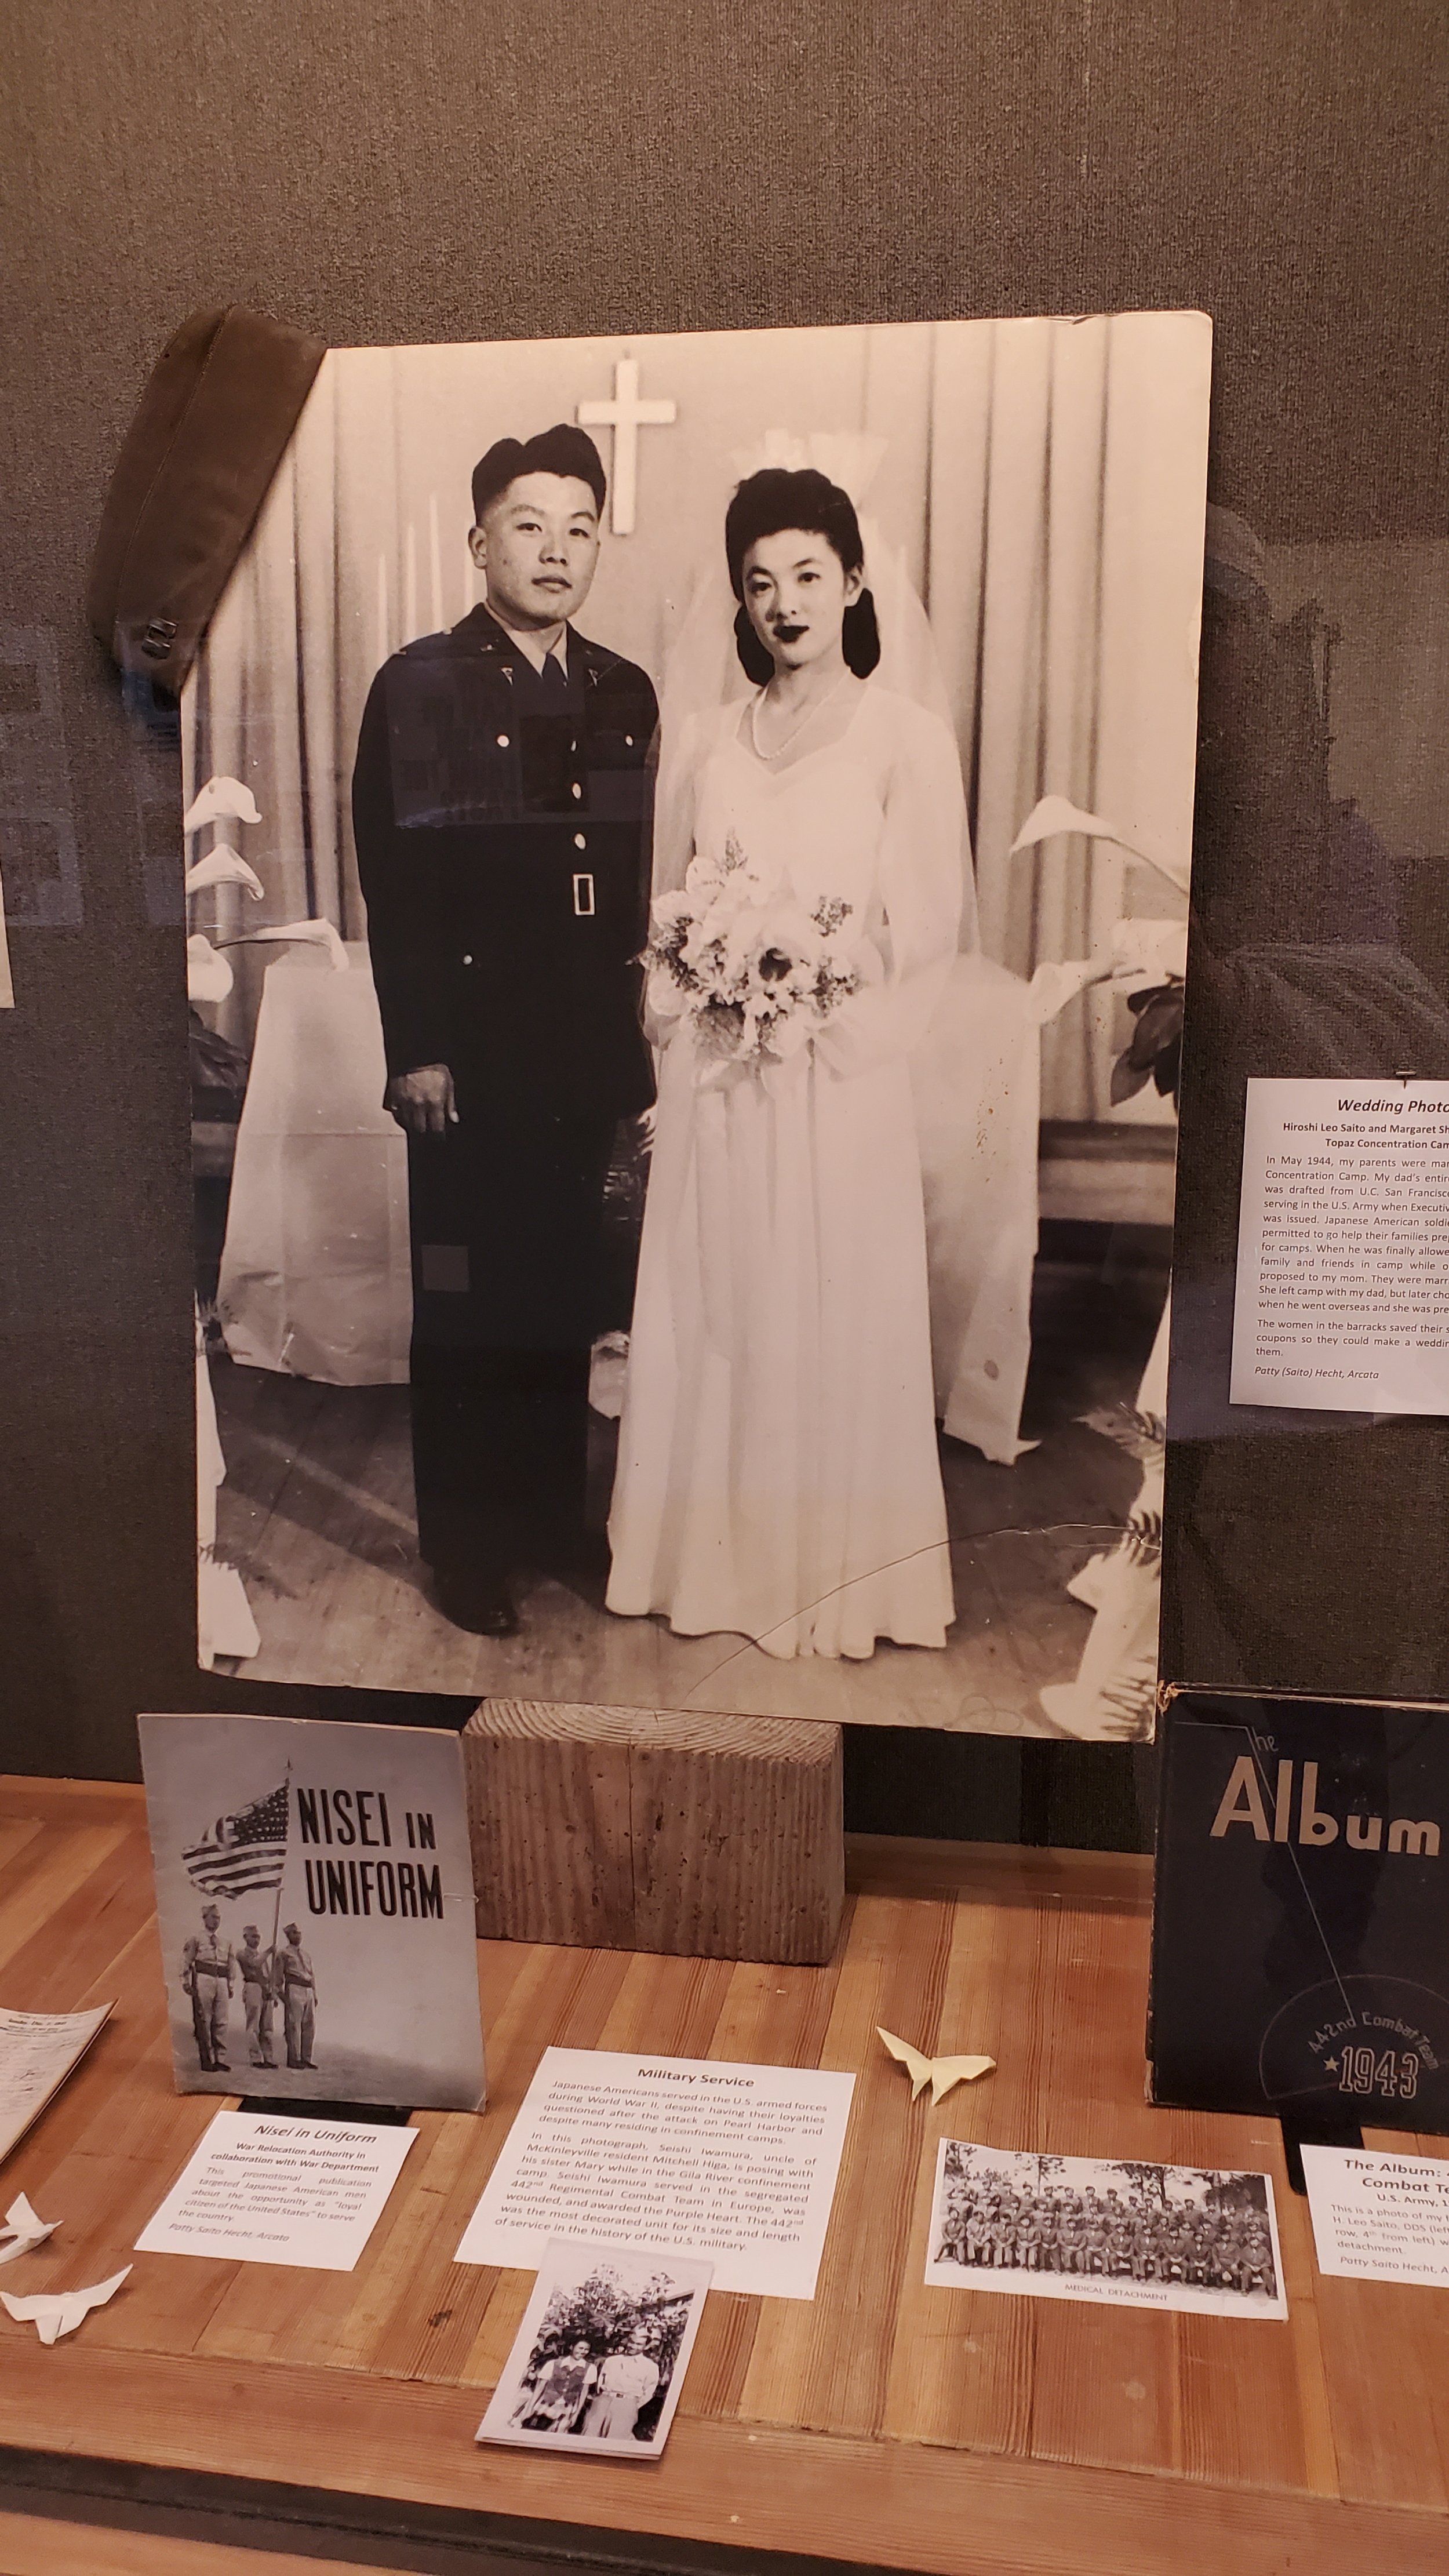 Wedding photo from Topaz Concentration Camp.